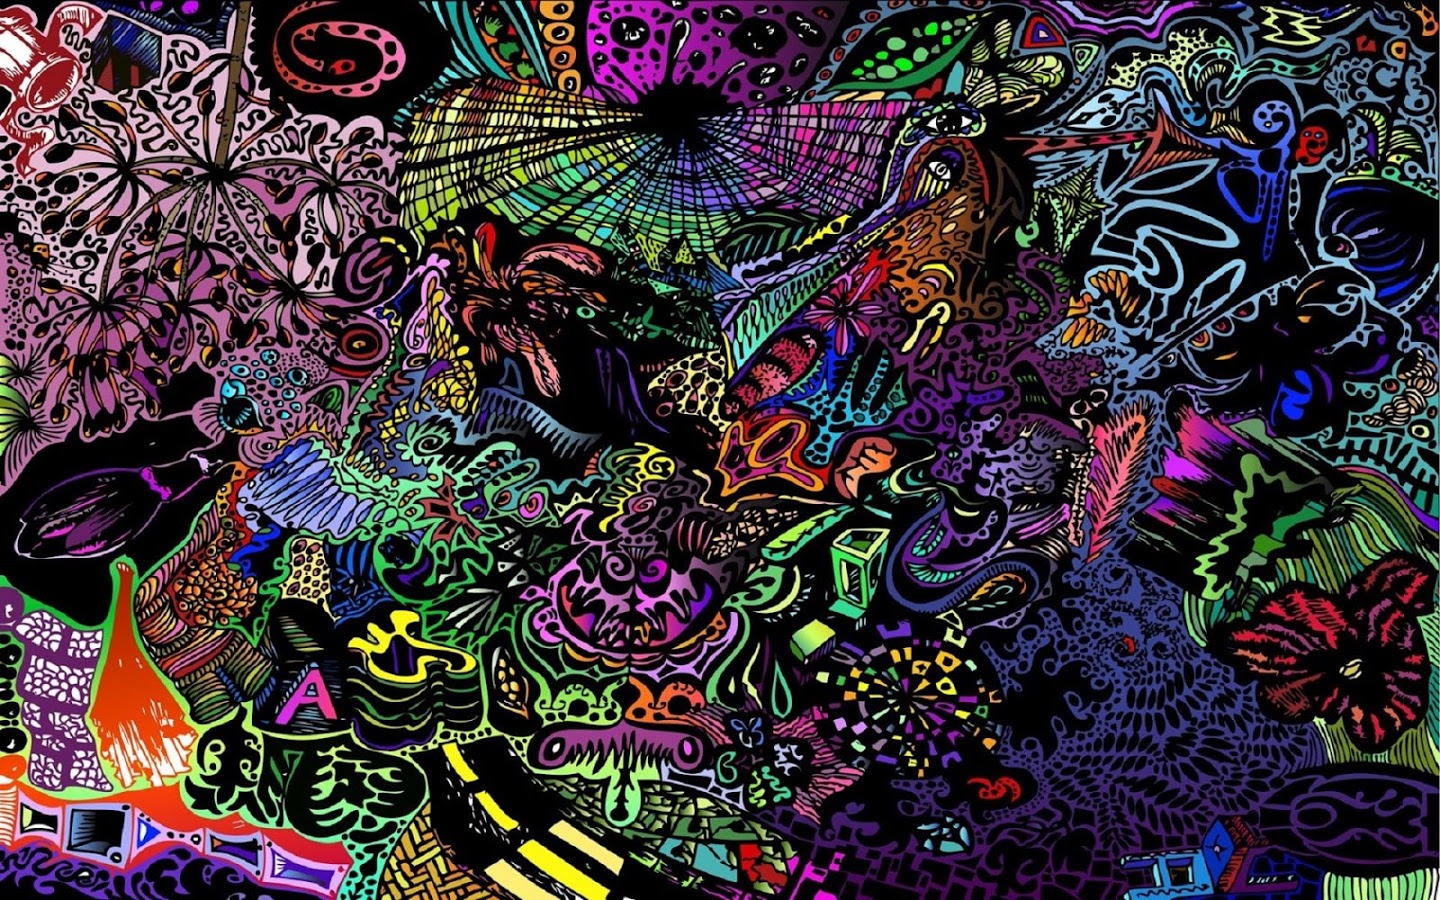 Psychedelic Live Wallpaper Surreal Art App High Quality